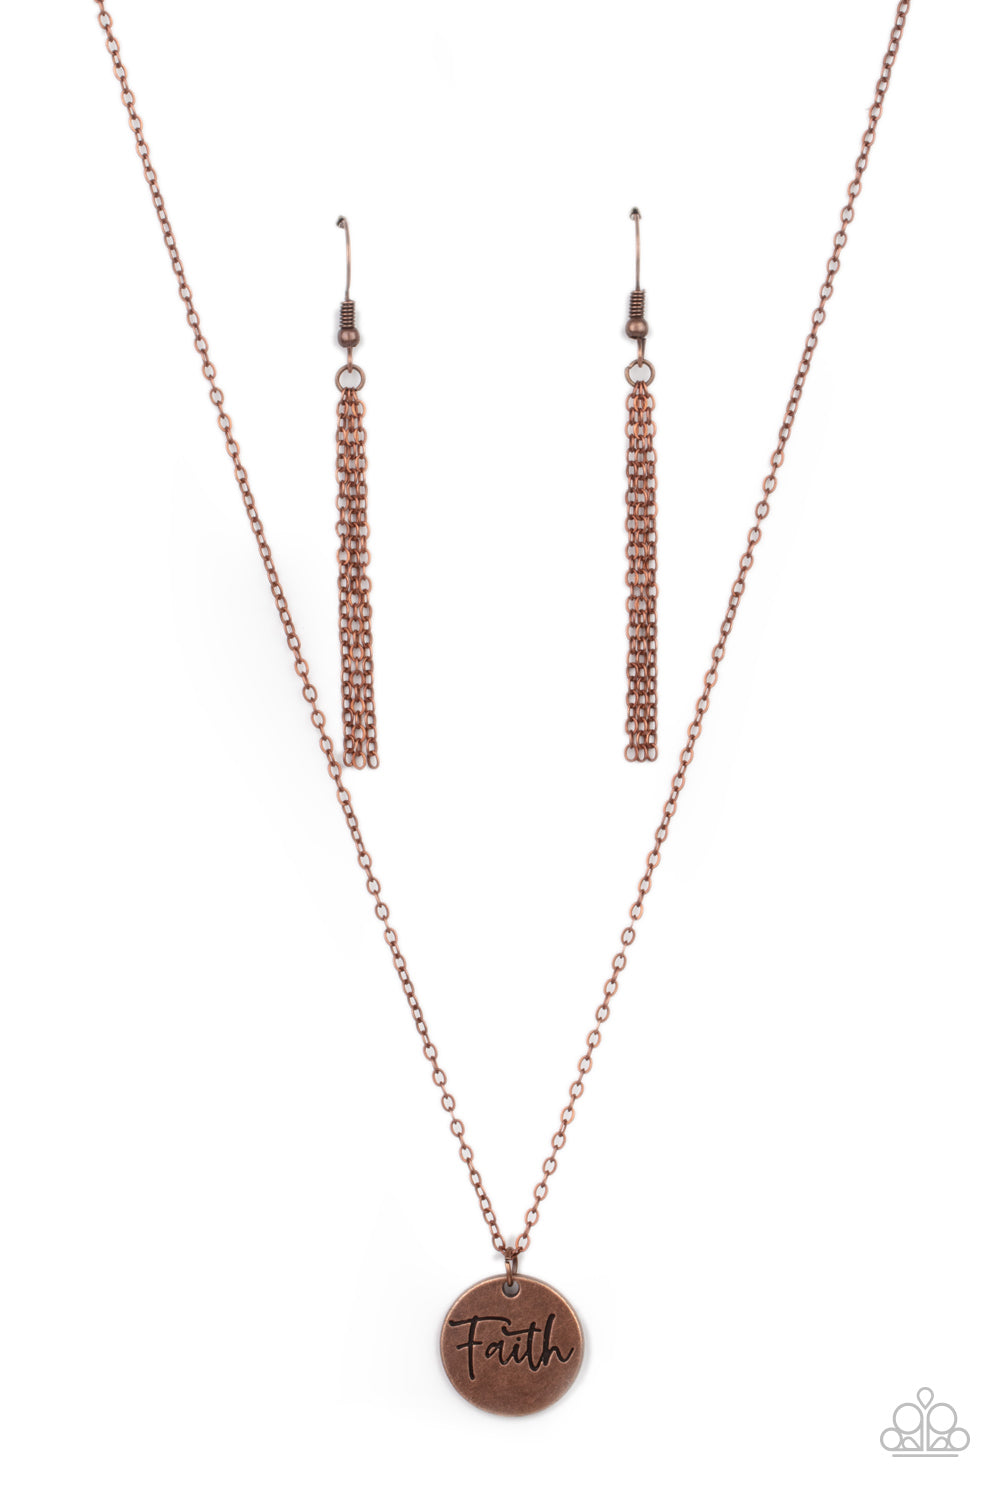 Choose Faith Copper Necklace - Paparazzi Accessories  A dainty copper disc is stamped in the word, "Faith," at the bottom of a rustic copper chain, creating an inspiring pendant below the collar. Features an adjustable clasp closure.  Sold as one individual necklace. Includes one pair of matching earrings.